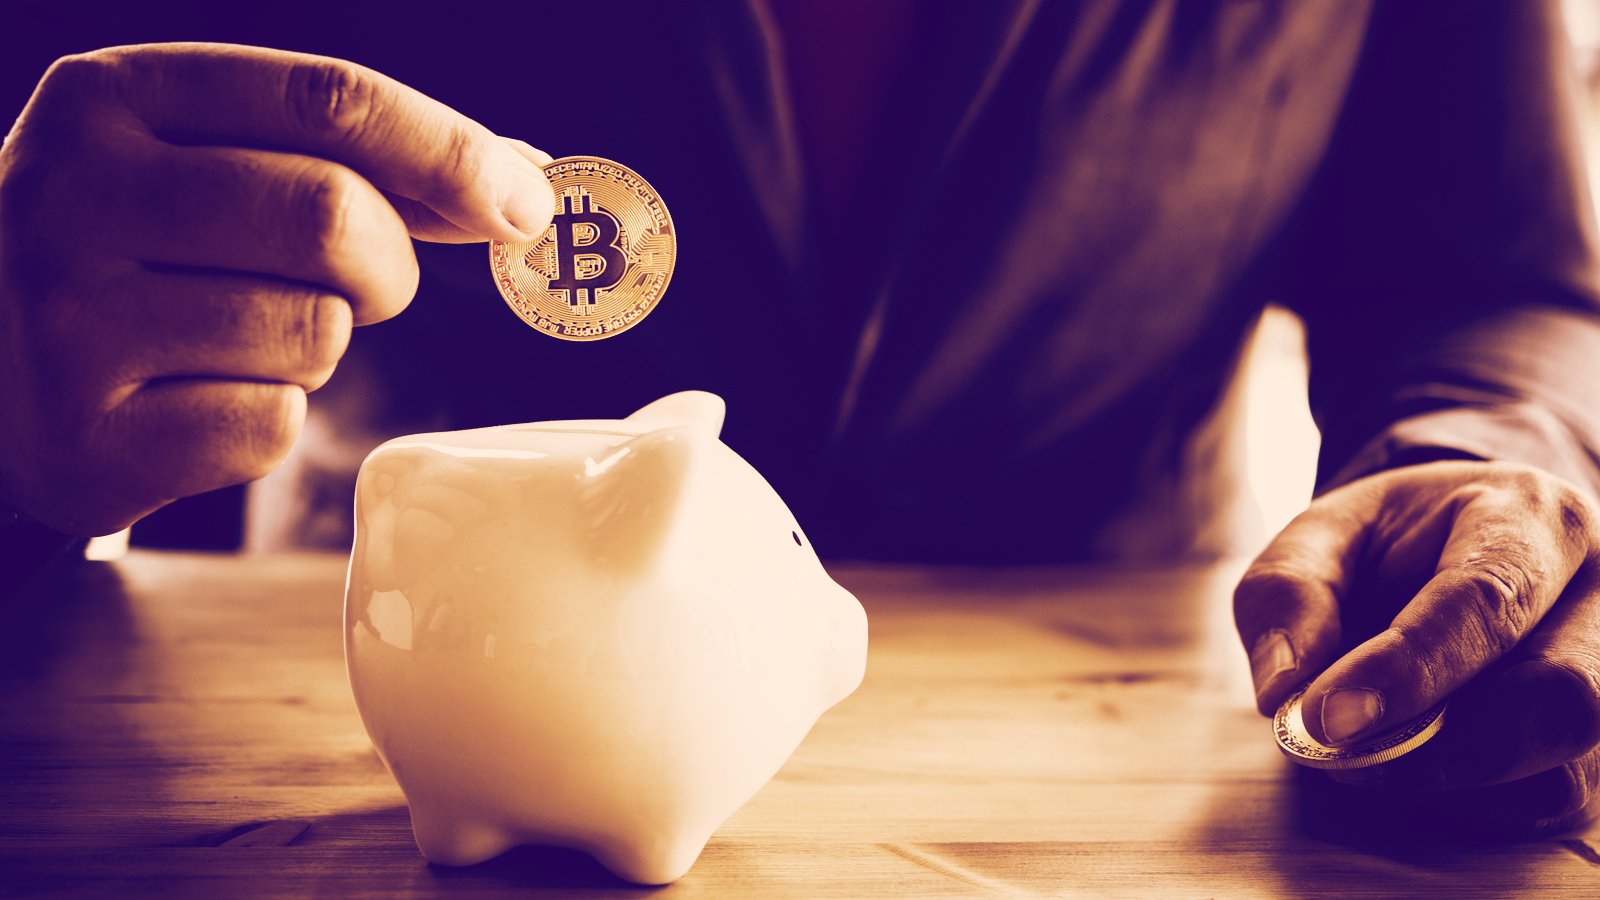 Bitcoin investments are on the rise. Image: Shutterstock